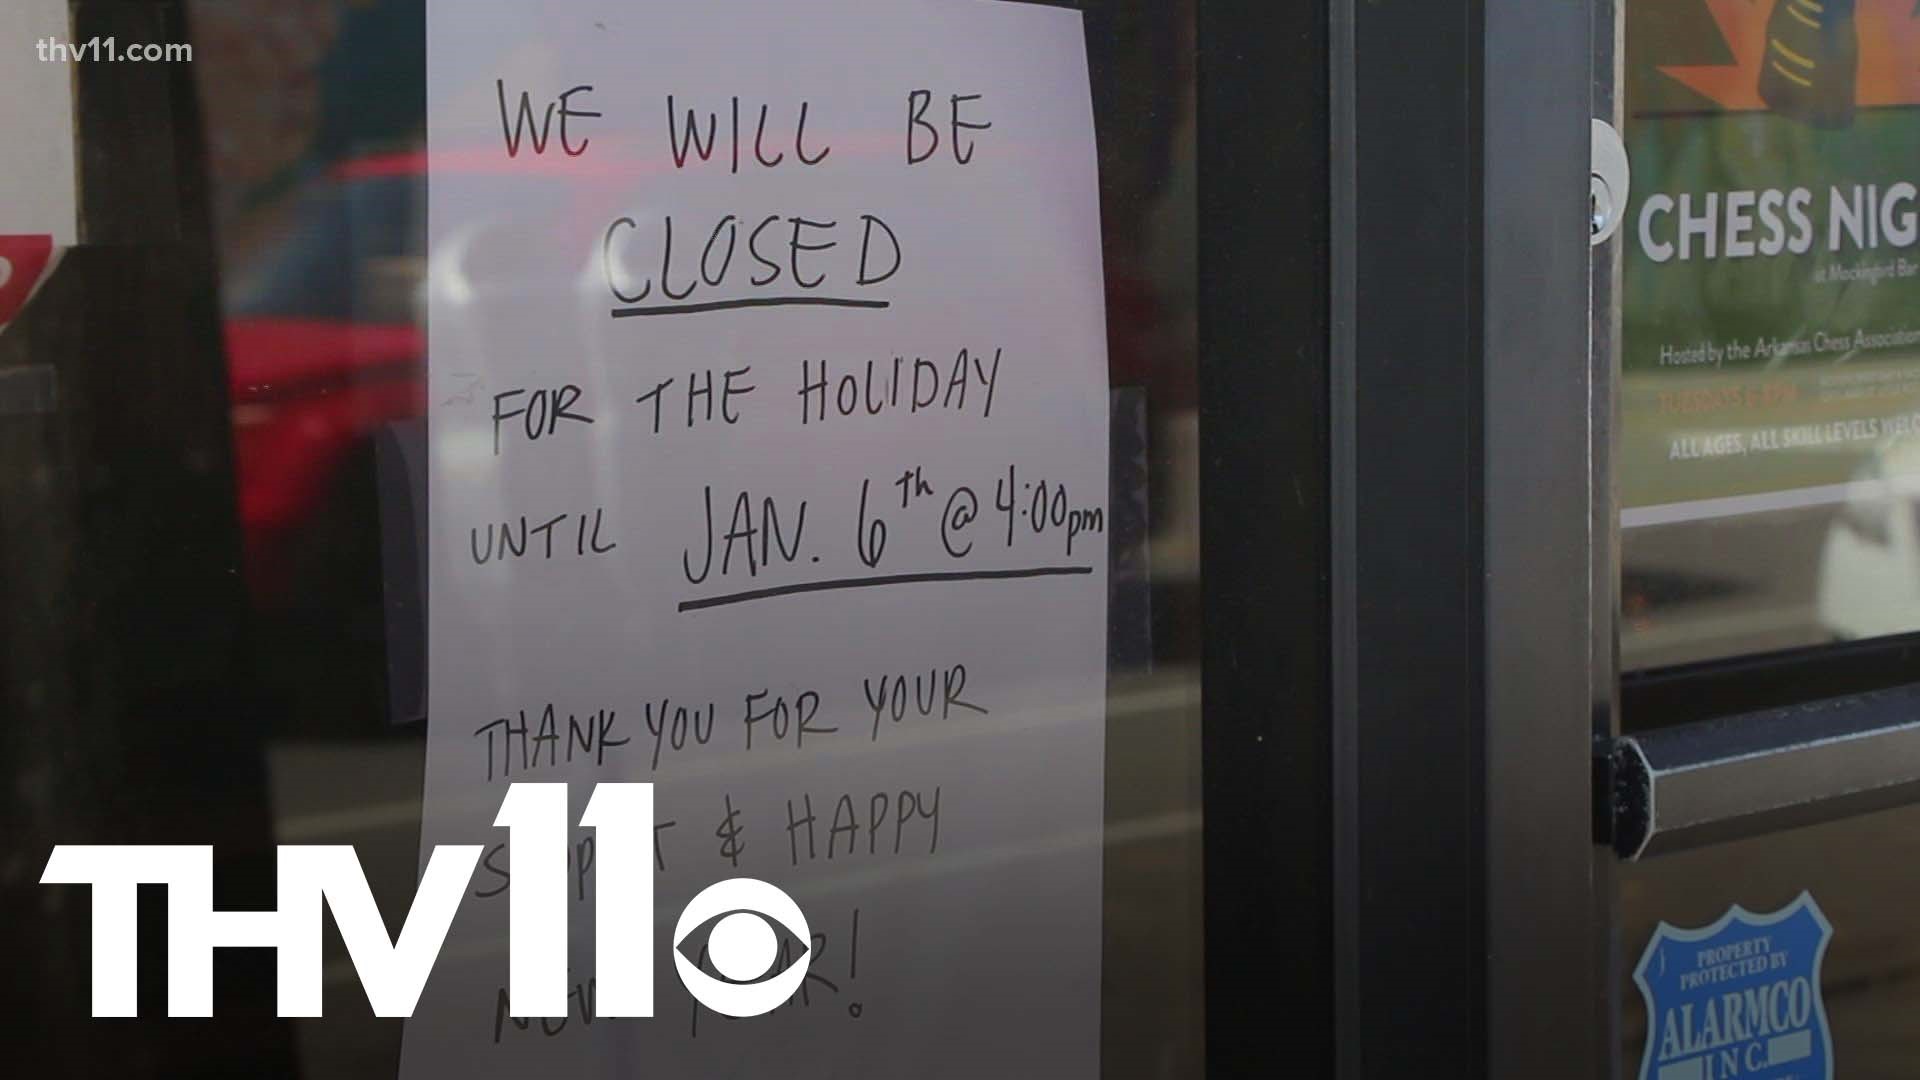 As the omicron variant continues to spread throughout the state, some restaurants are now being forced to close early, or even close entirely.